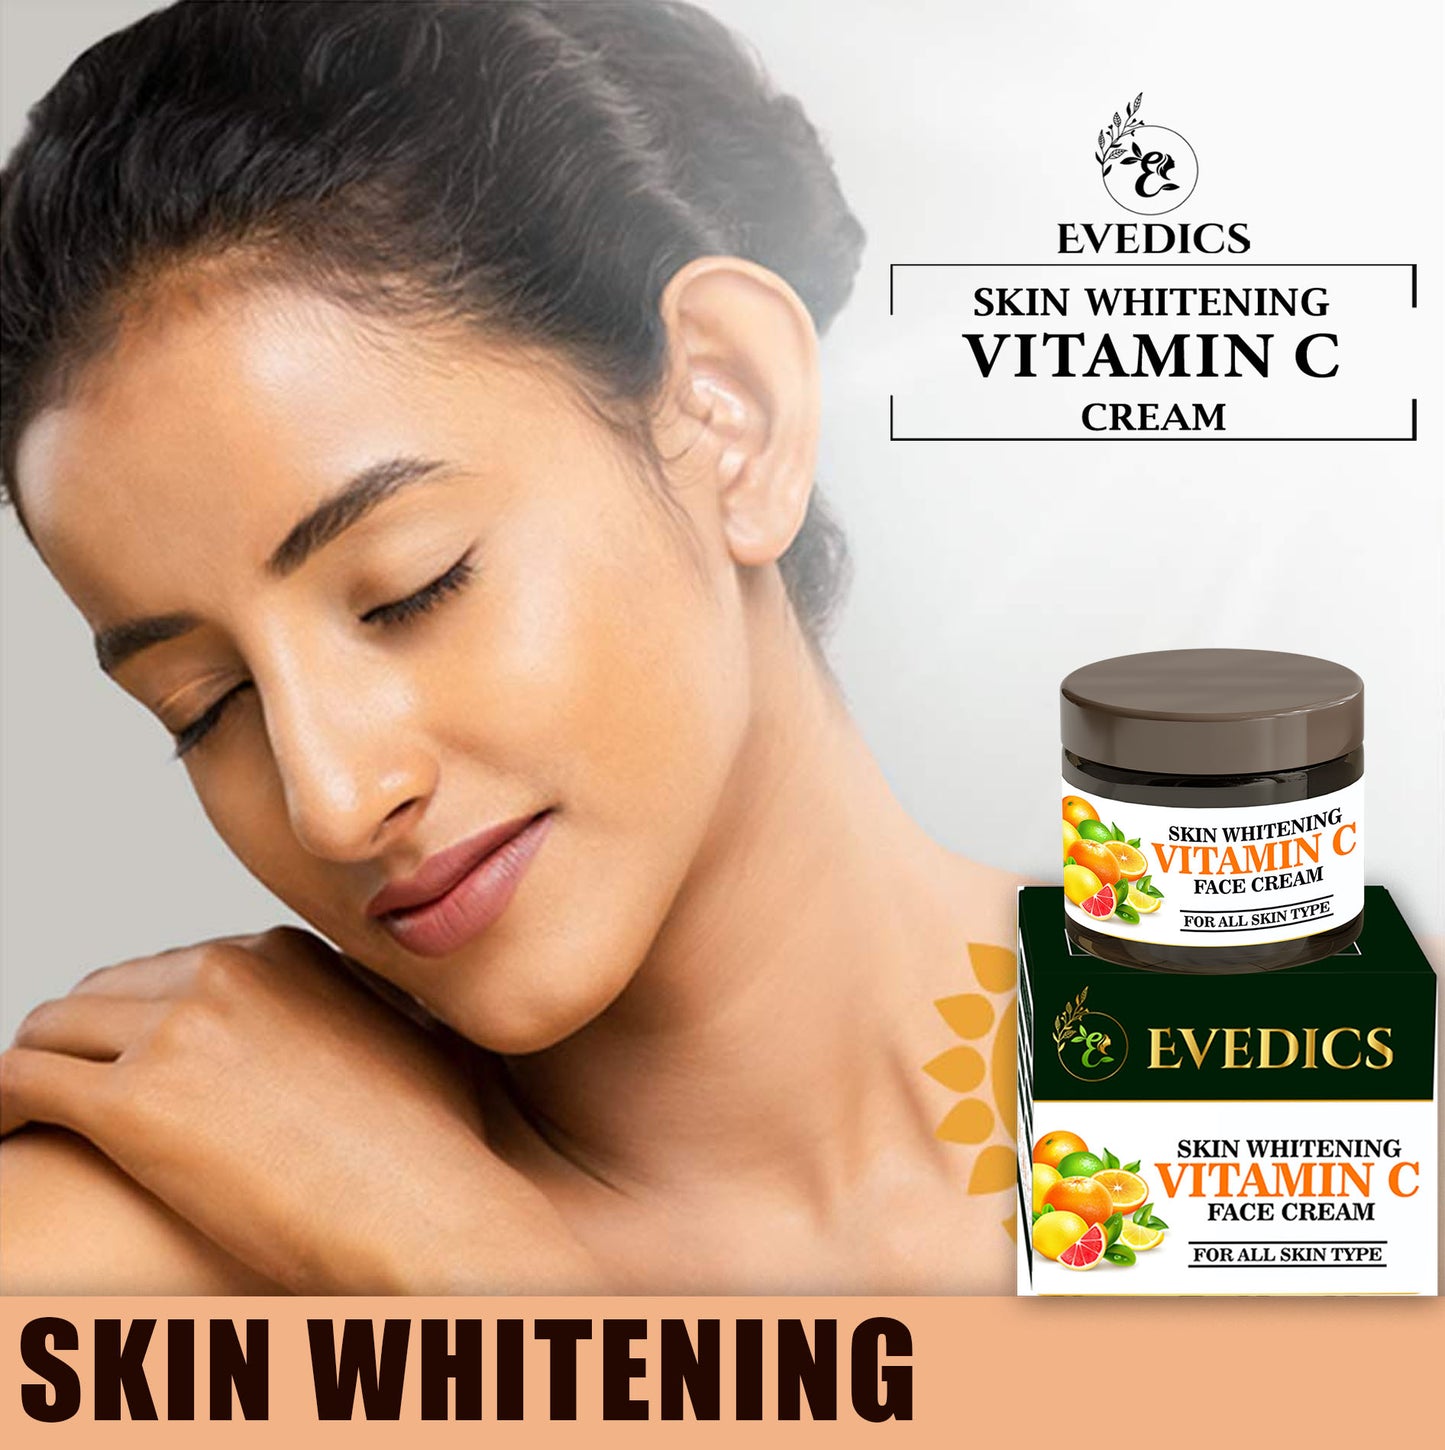 Evedics Vitamin C Correcting and Brightening Non Greasy Face Cream for All Skin Types ounger Looking Nourished & Bright Skin | SLS & Paraben Free.